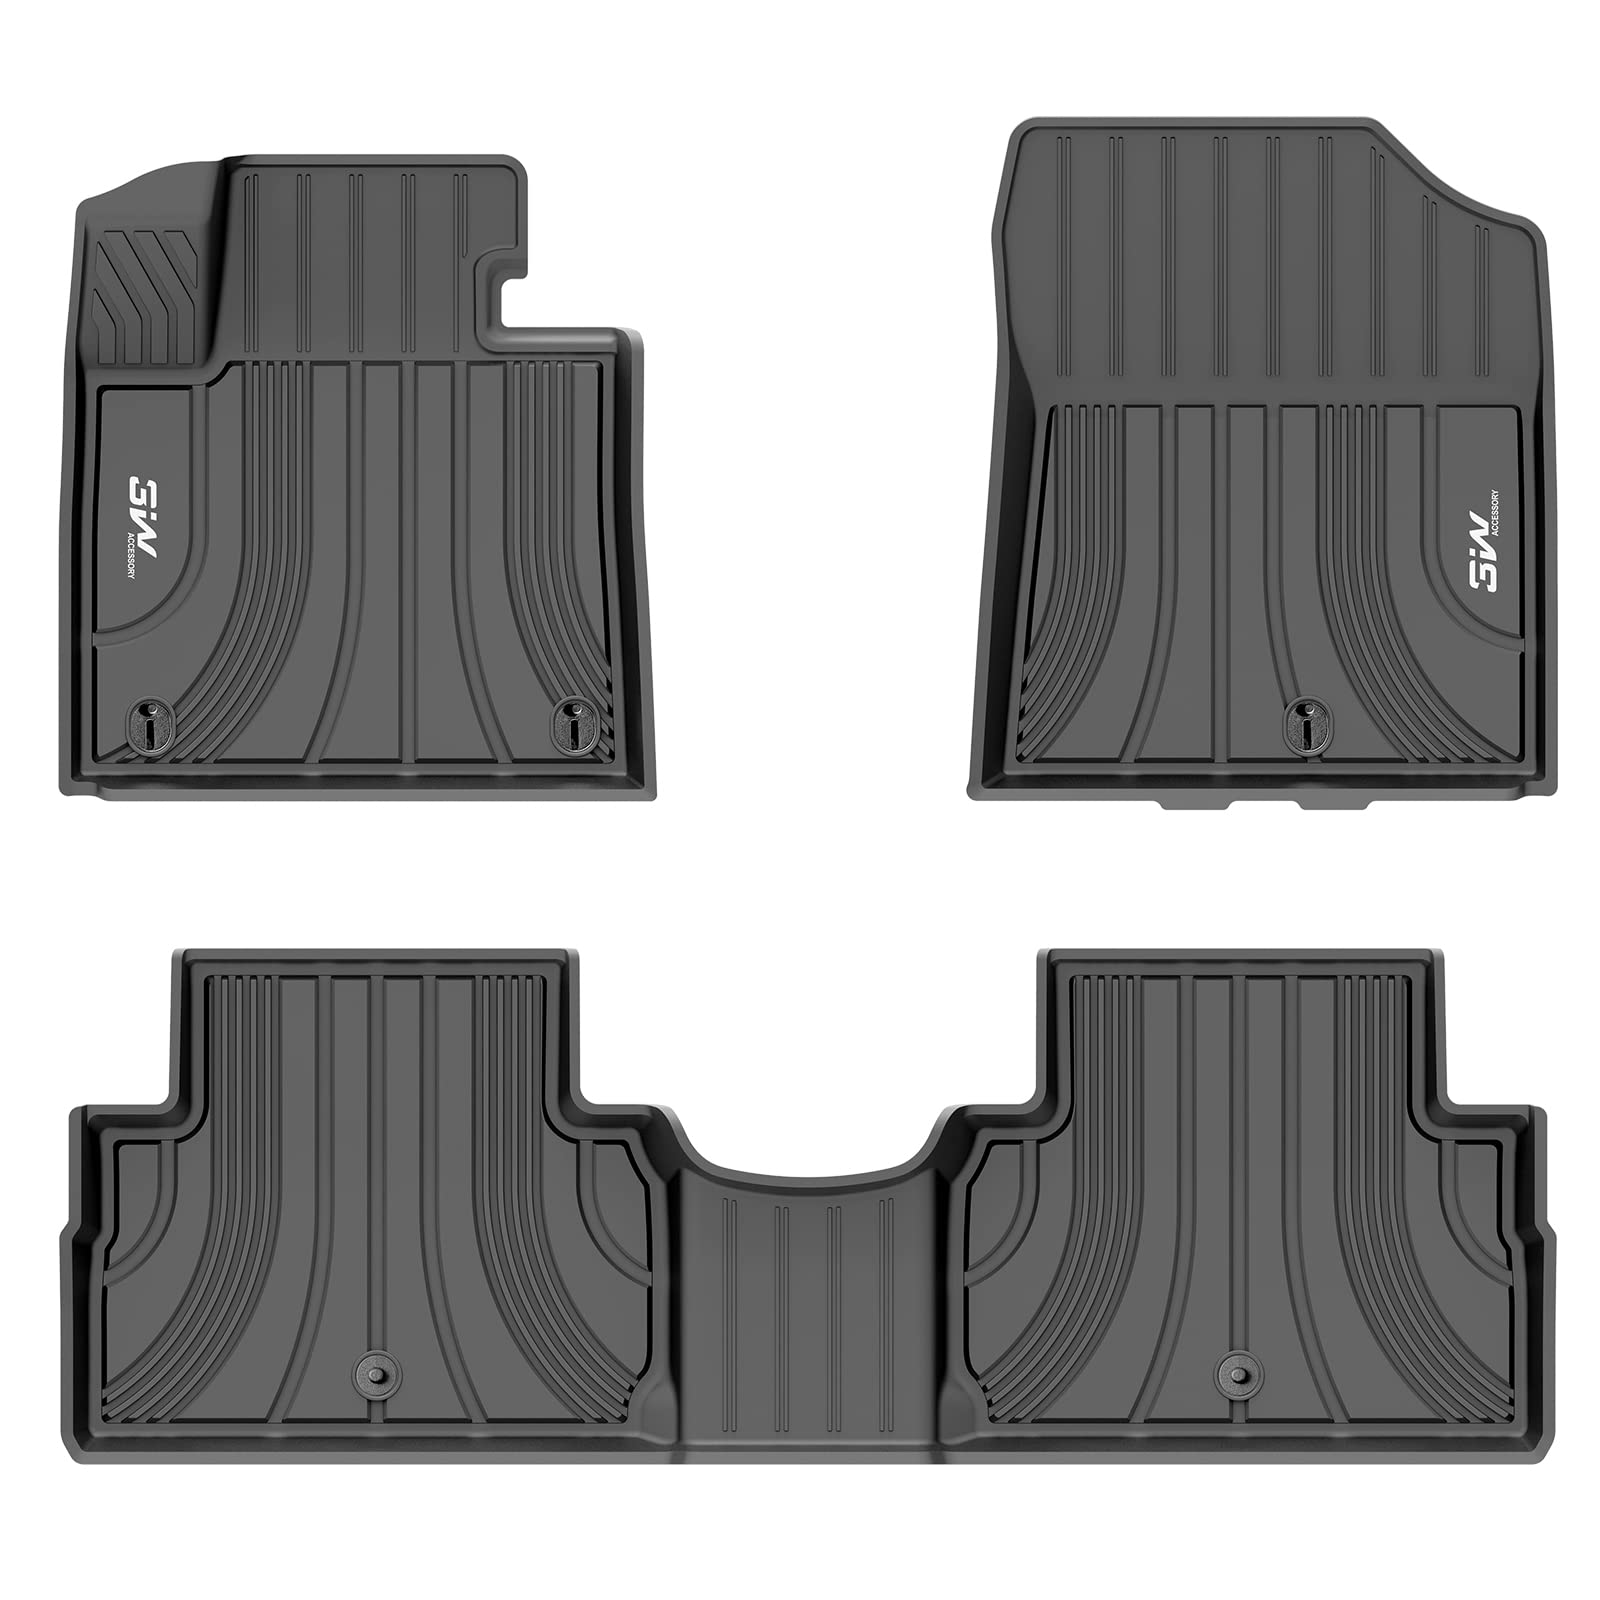 3W Hyundai Sonata 2020-2023 (Only for FWD Models) Custom Floor Mats TPE Material & All-Weather Protection Vehicles & Parts 3Wliners 2020-2023 Sonata 2020-2023 1st&2nd Row Mats